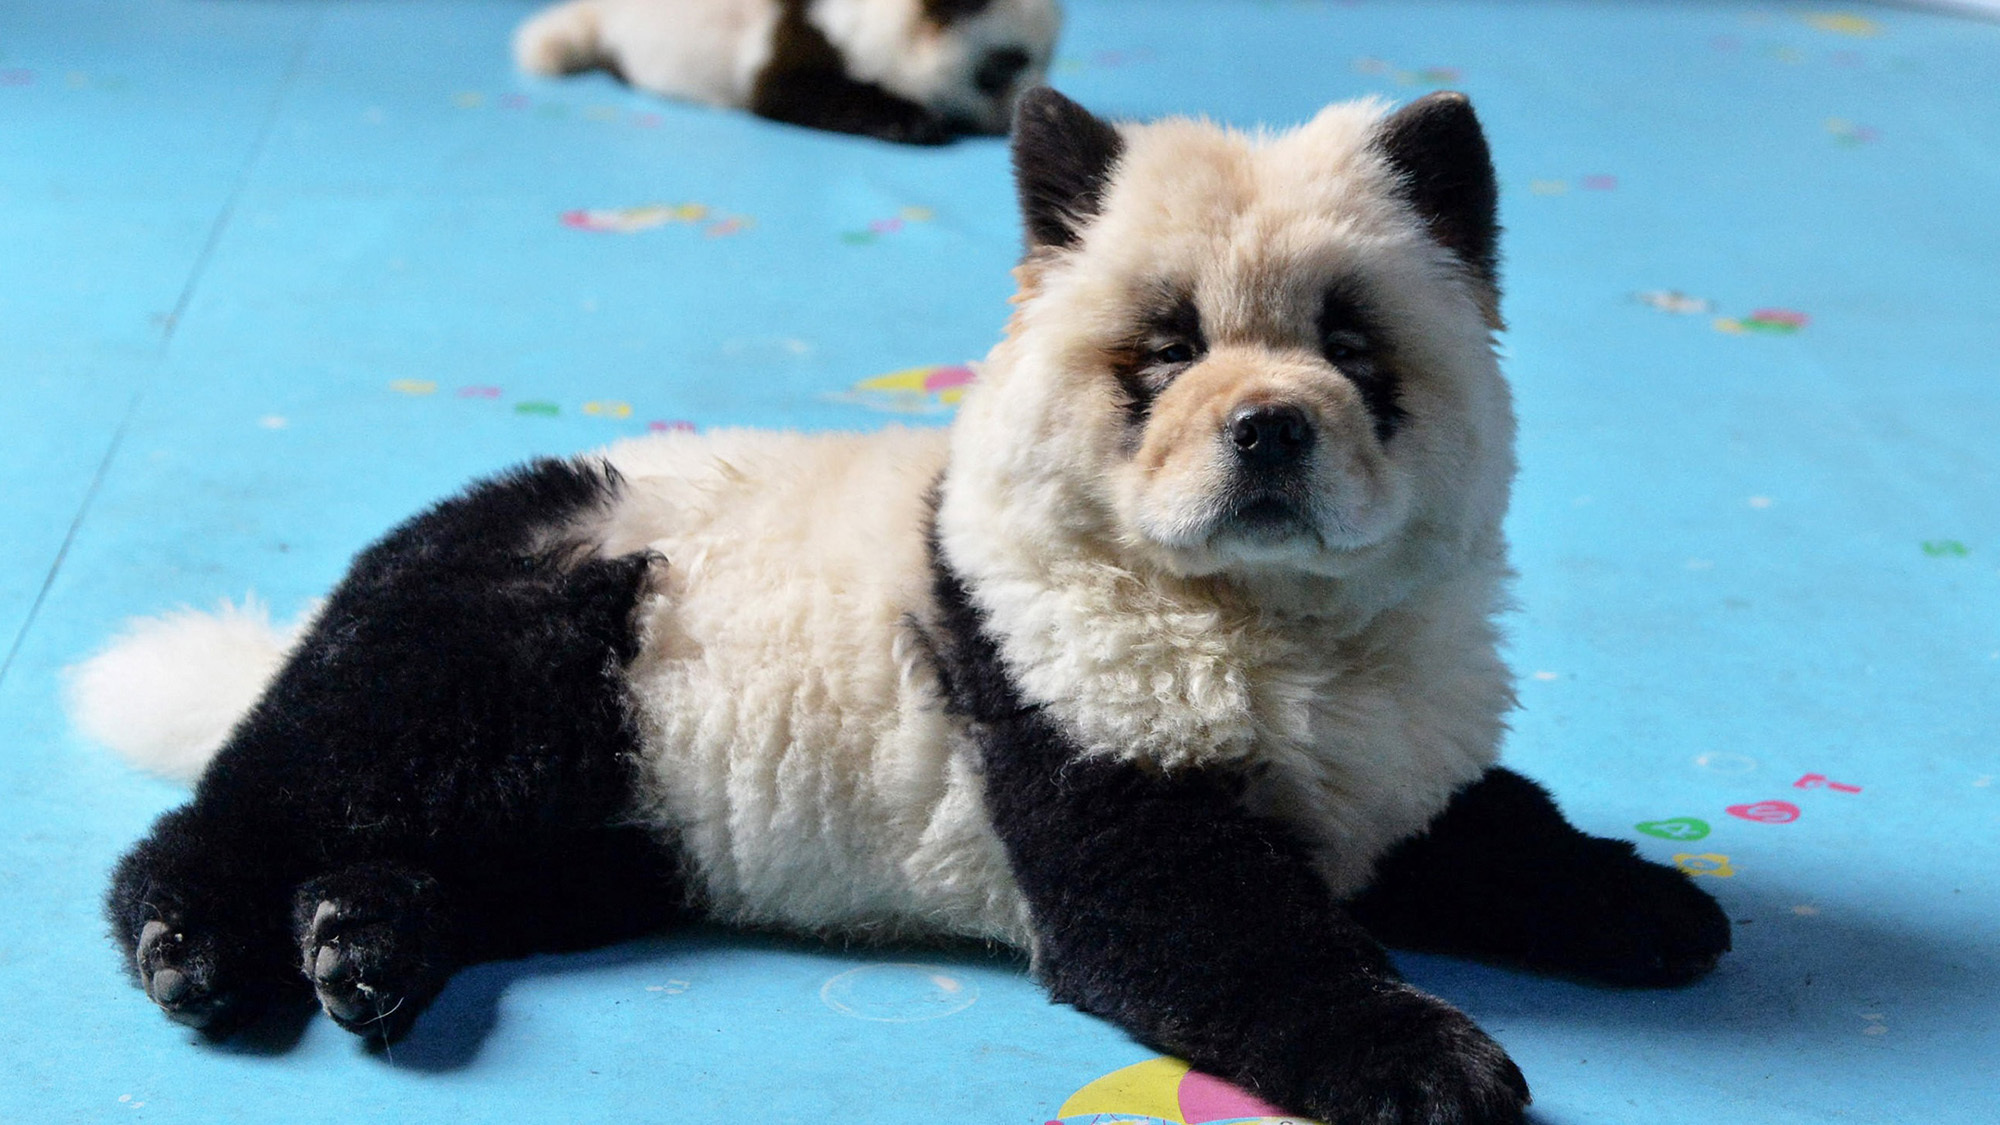 A dog dyed black and white to mimic a panda cub at Cute Pet Games cafe in Chengdu in China's southwestern Sichuan province on October 23, 2019.